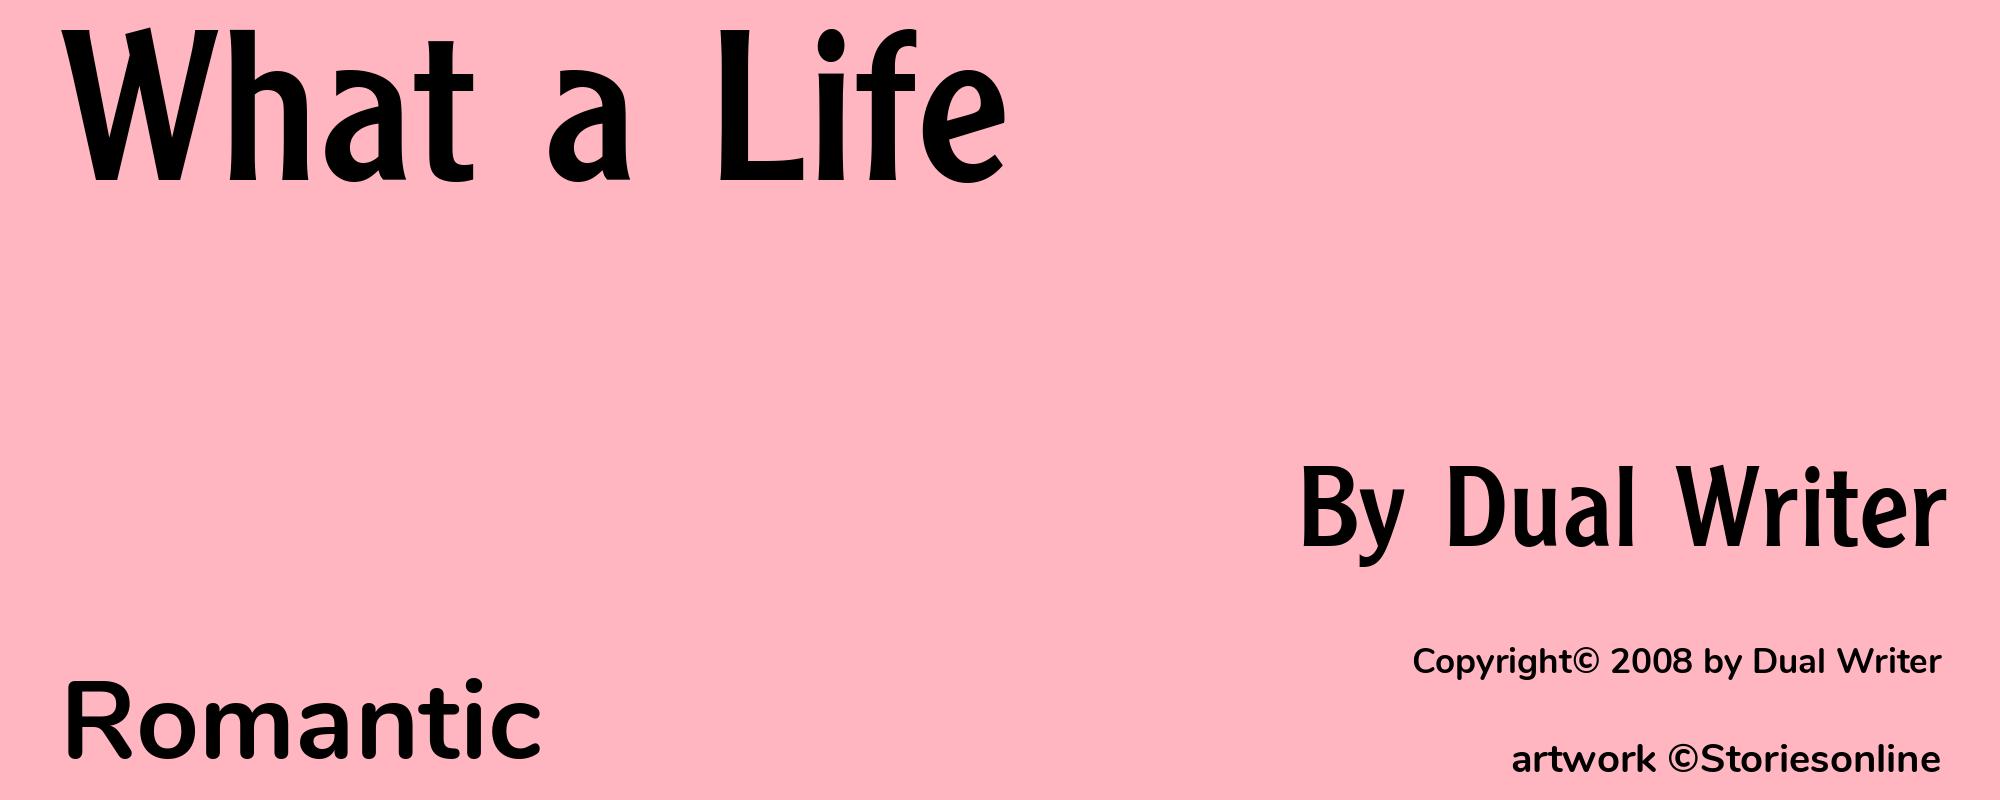 What a Life - Cover